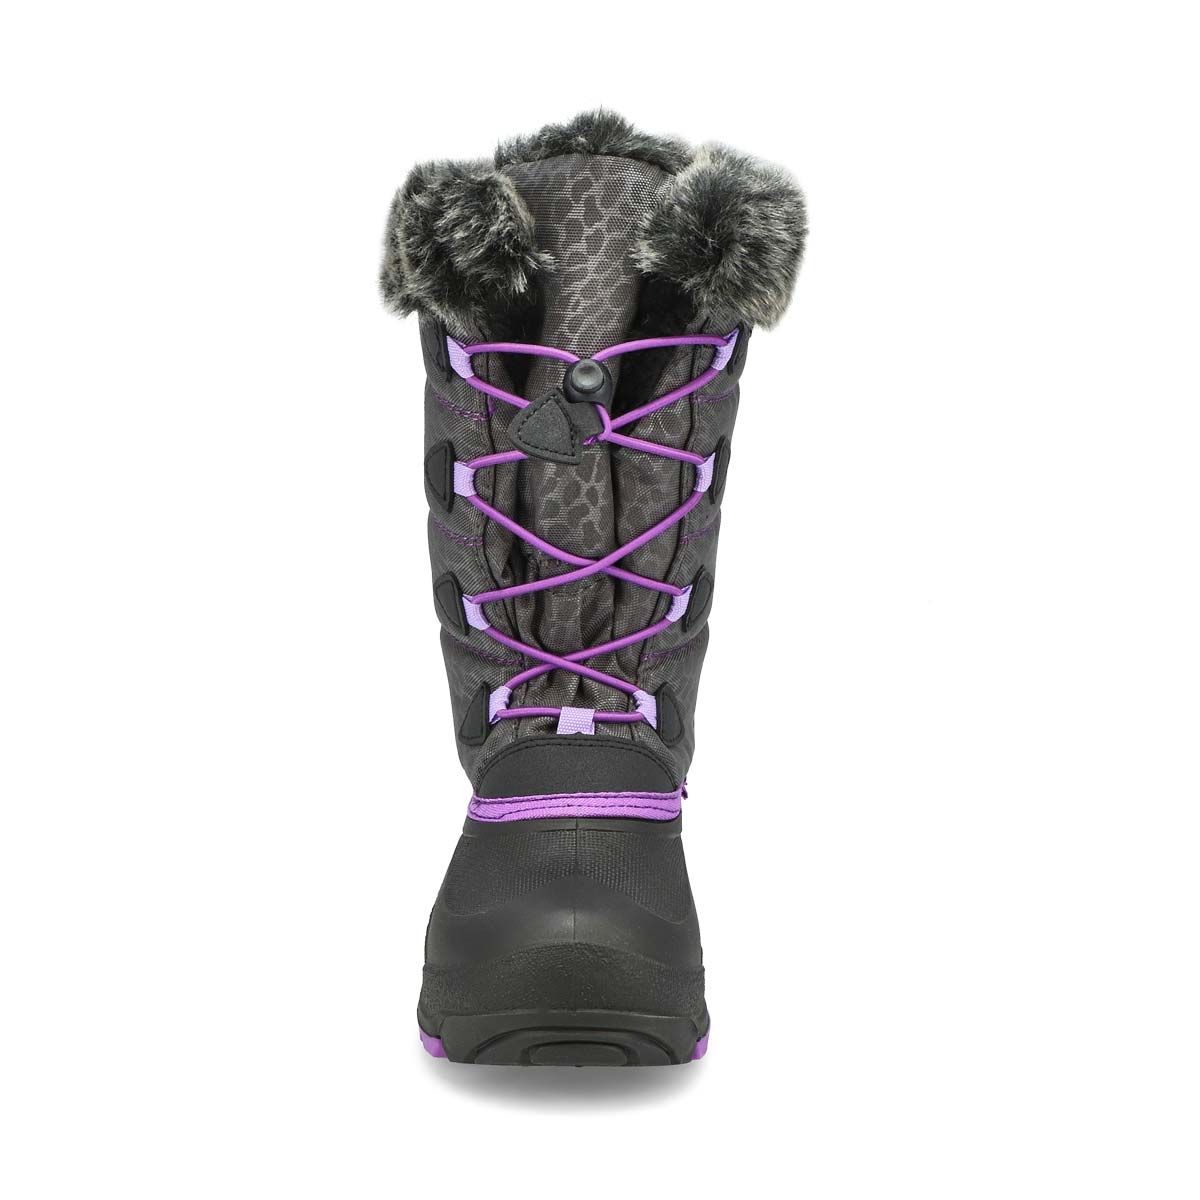 Girls Snowgypsy 3 Winter Boot - Char/Orch